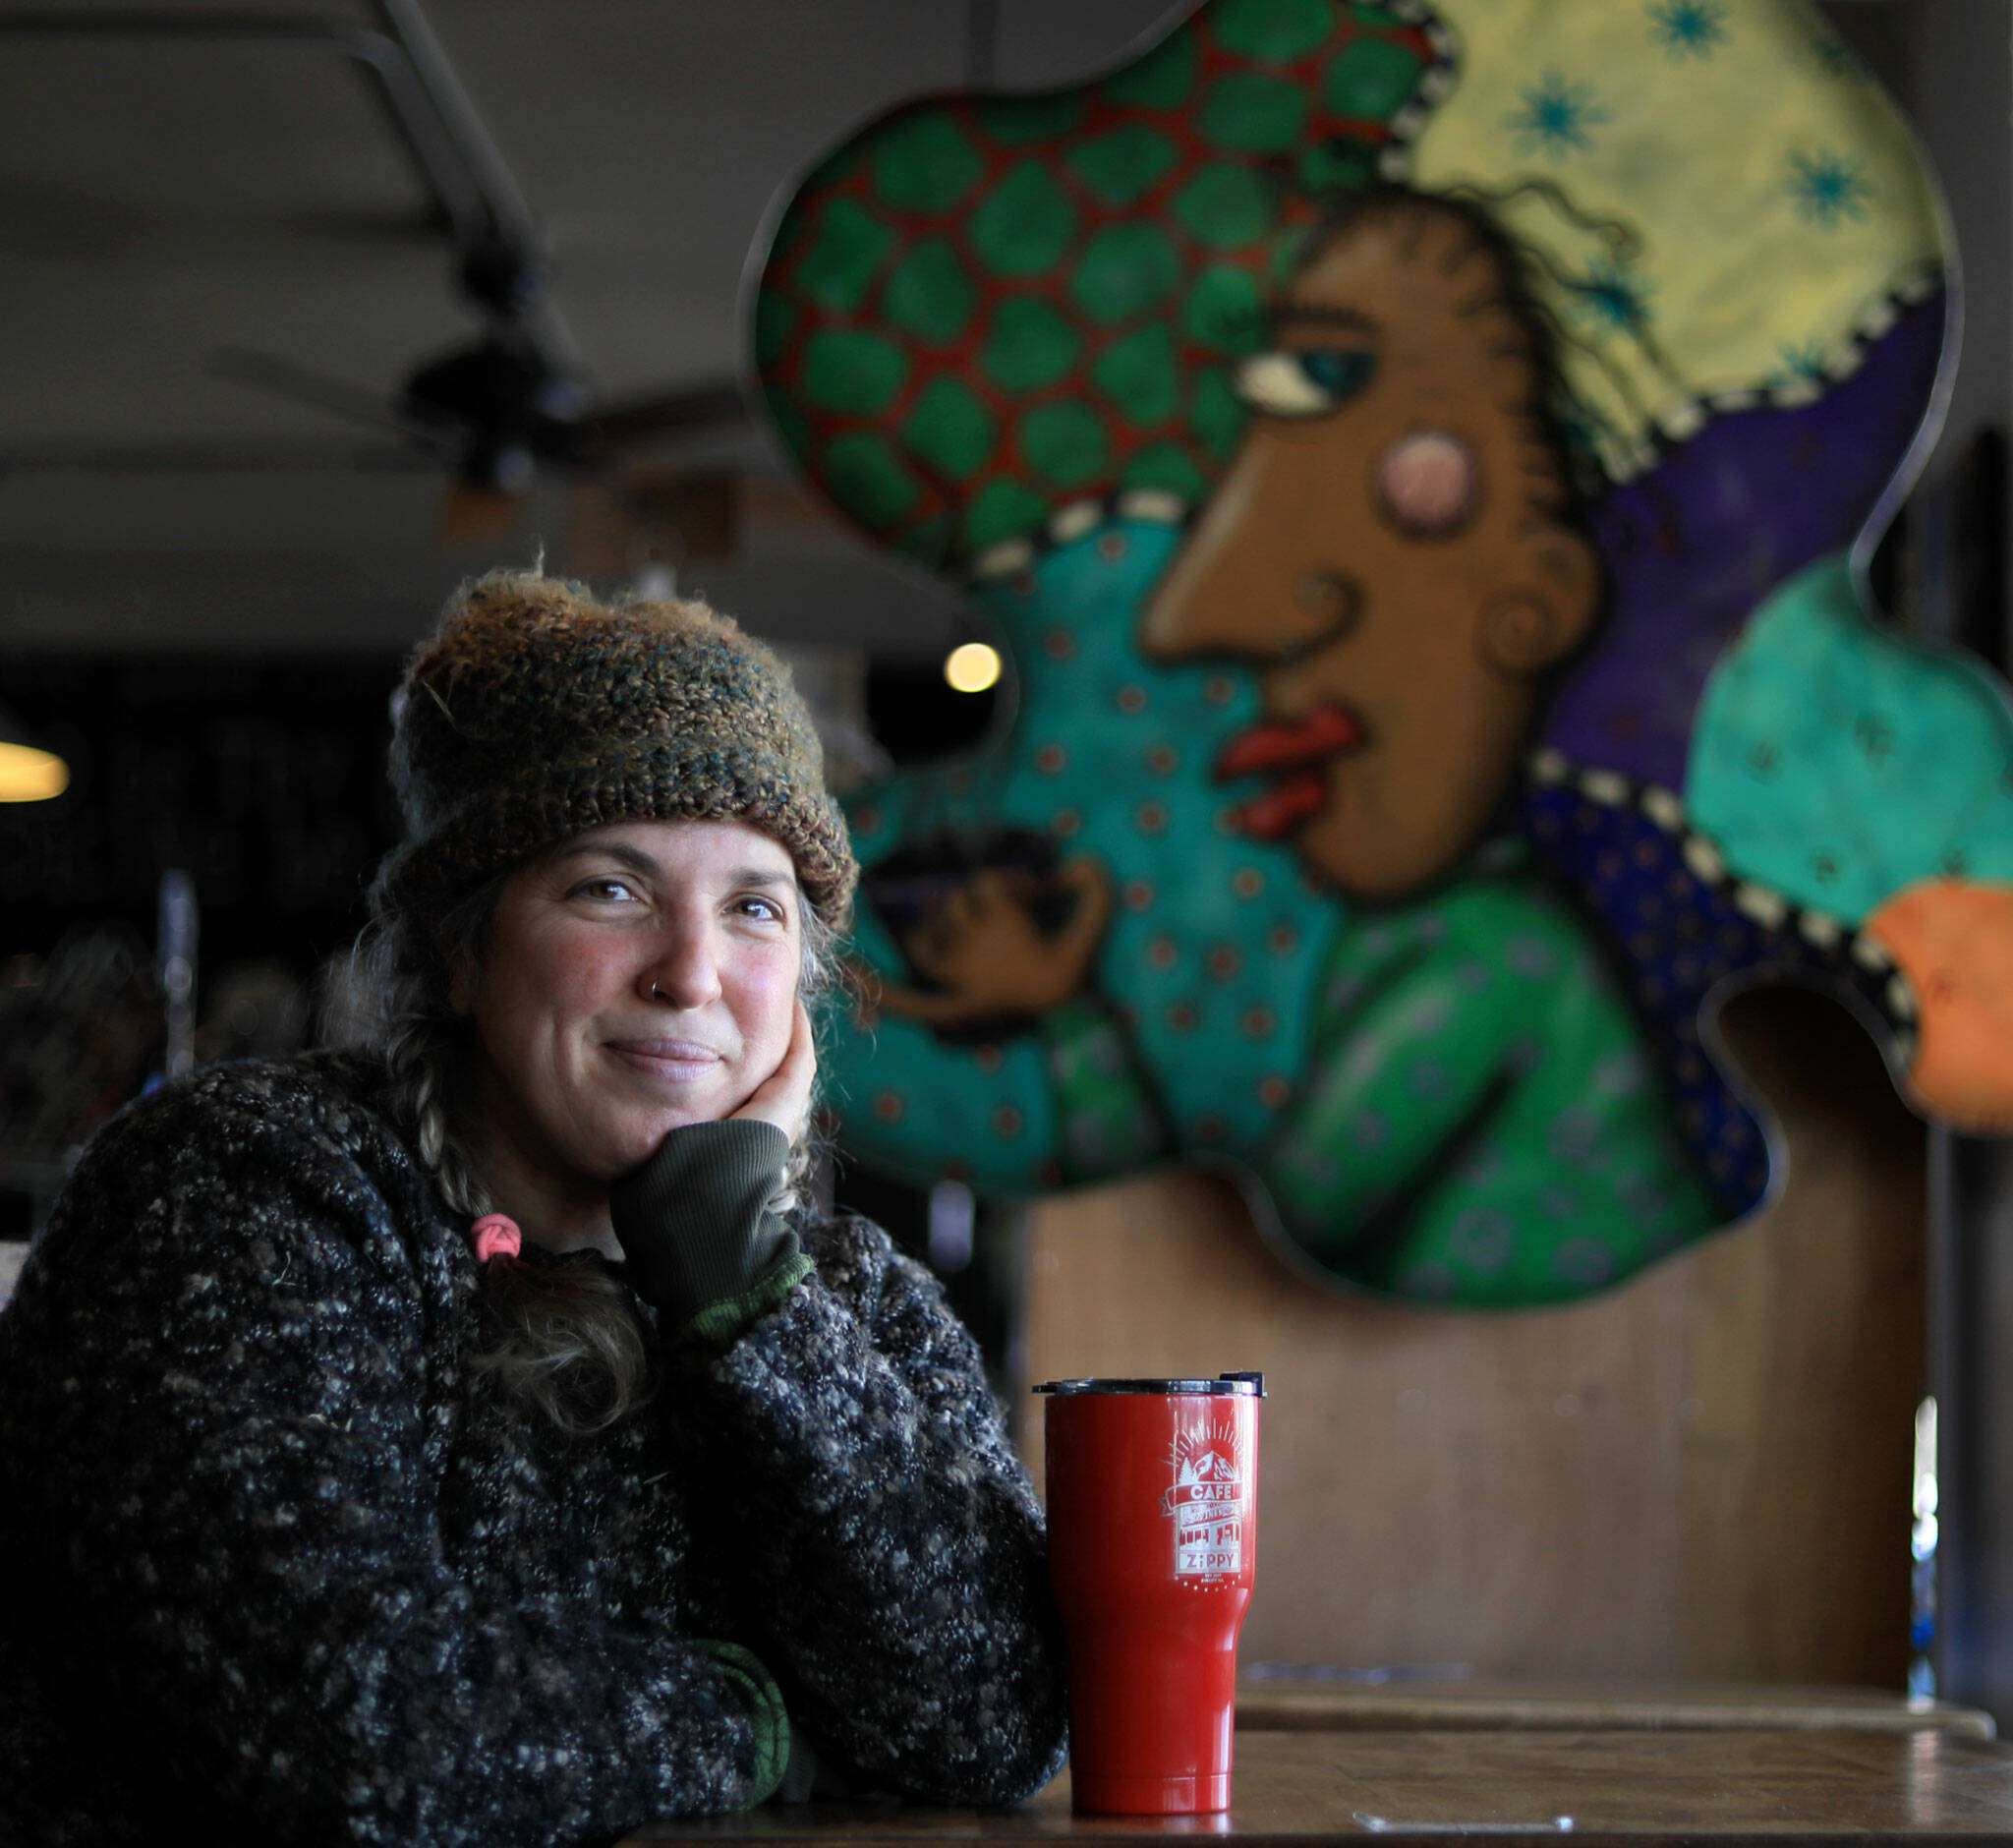 Marilyn Rosenberg is closing Cafe Zippy after 17 years in Everett. (Kevin Clark / The Herald)